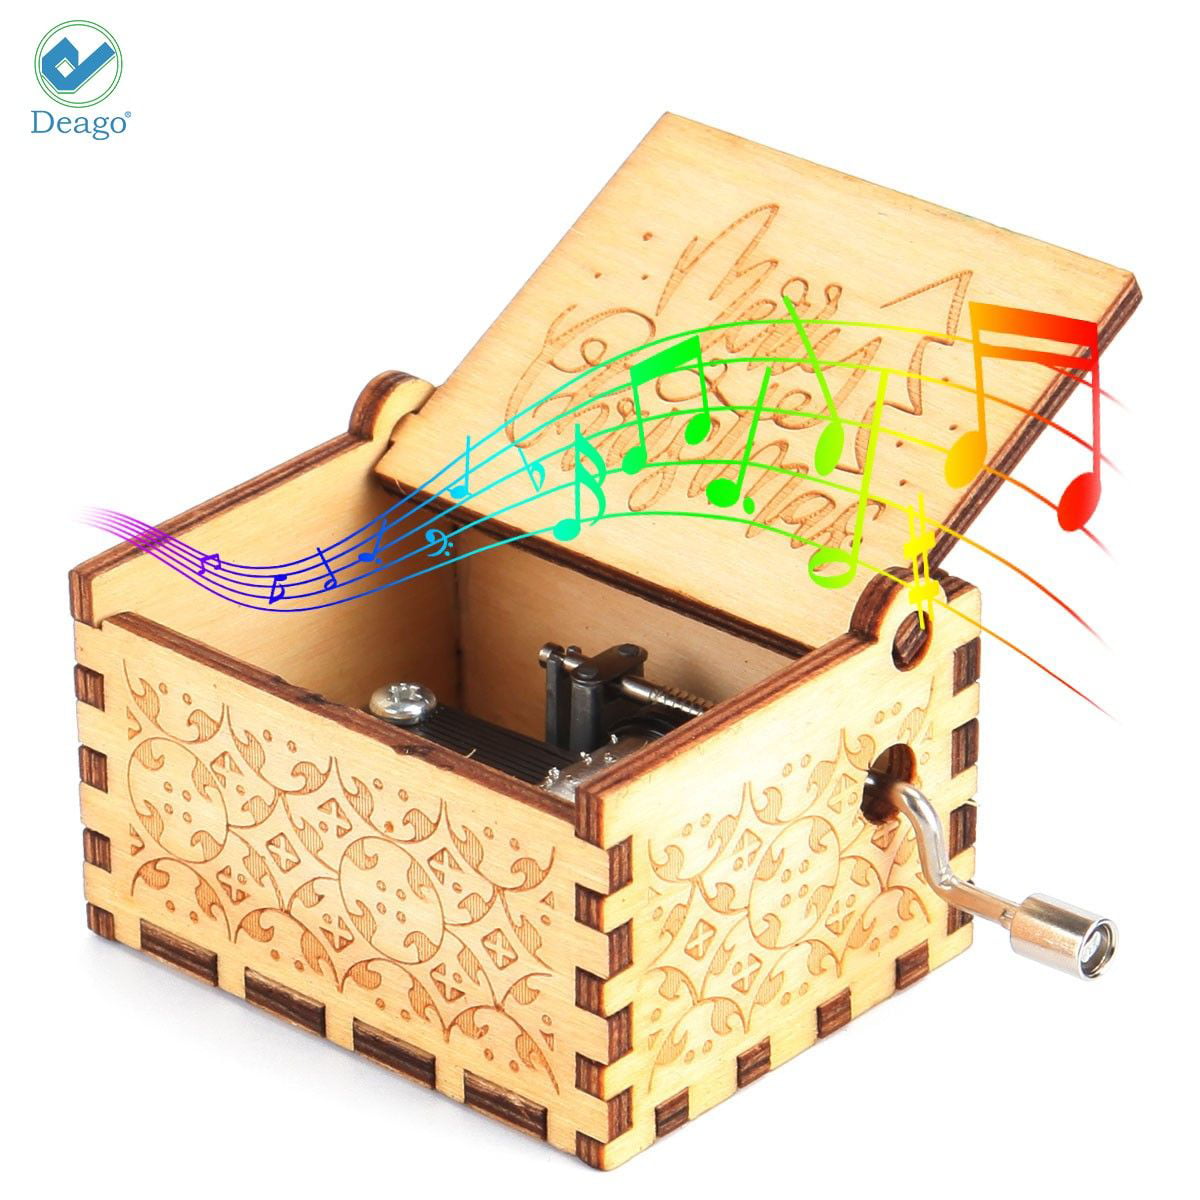 The Pooh Saying Music Box ukebobo Wooden Music Box New Years Gifts Gift for Friend 1 Set Merry Christmas Music Box